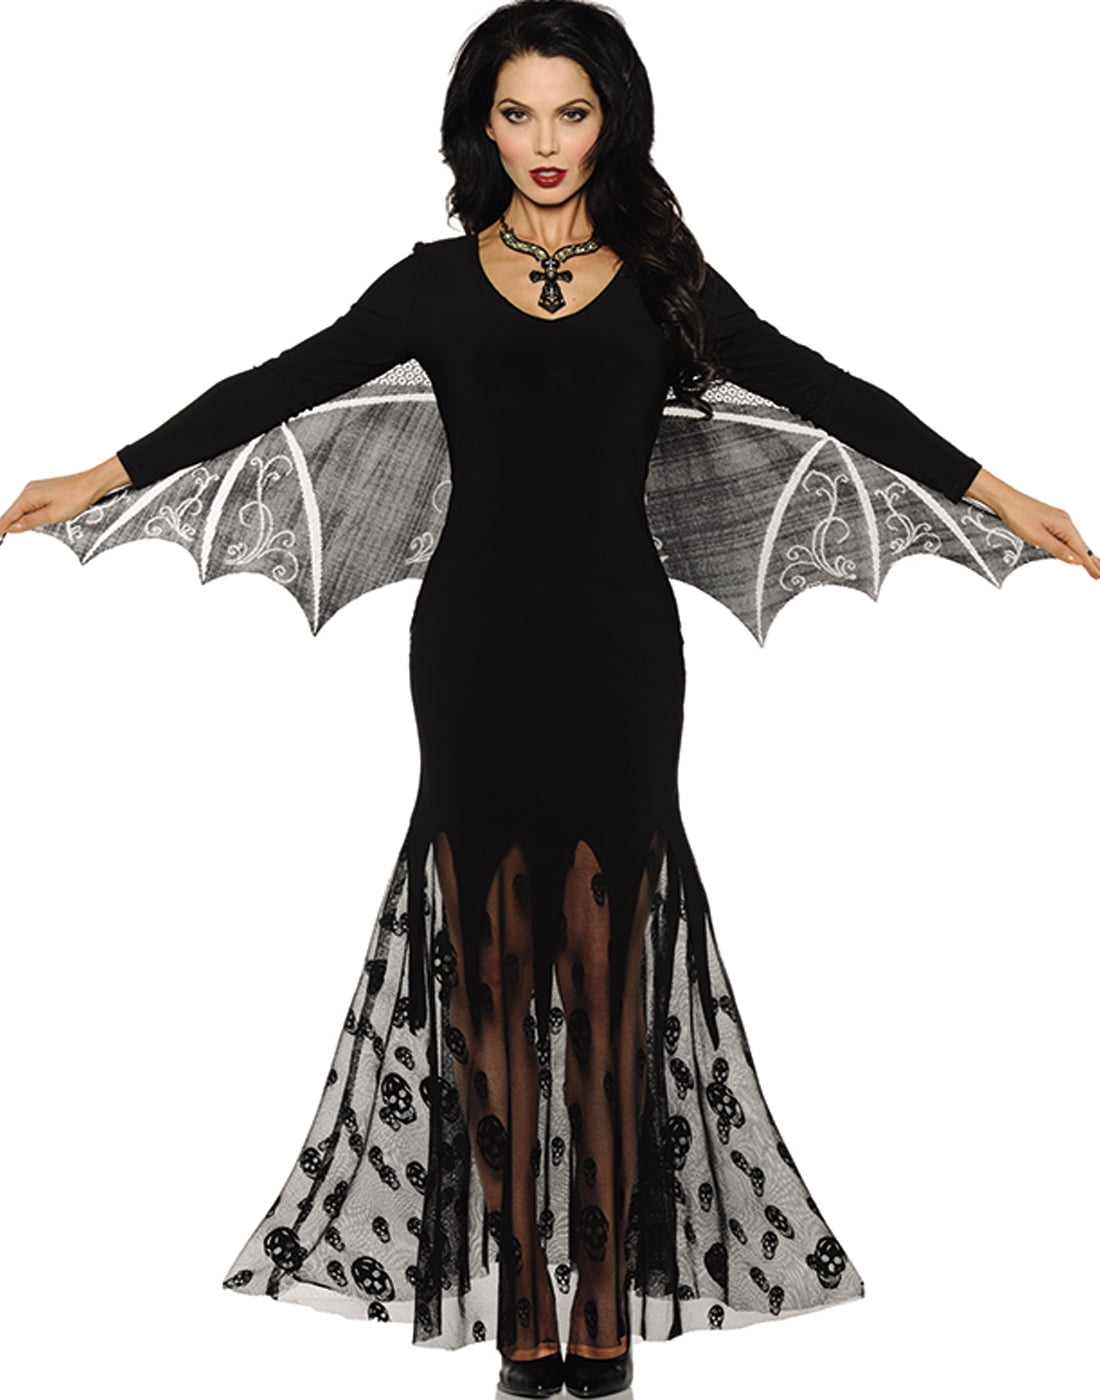 Vampiress Womens Gothic Vampire Dress With Attached Wings Halloween